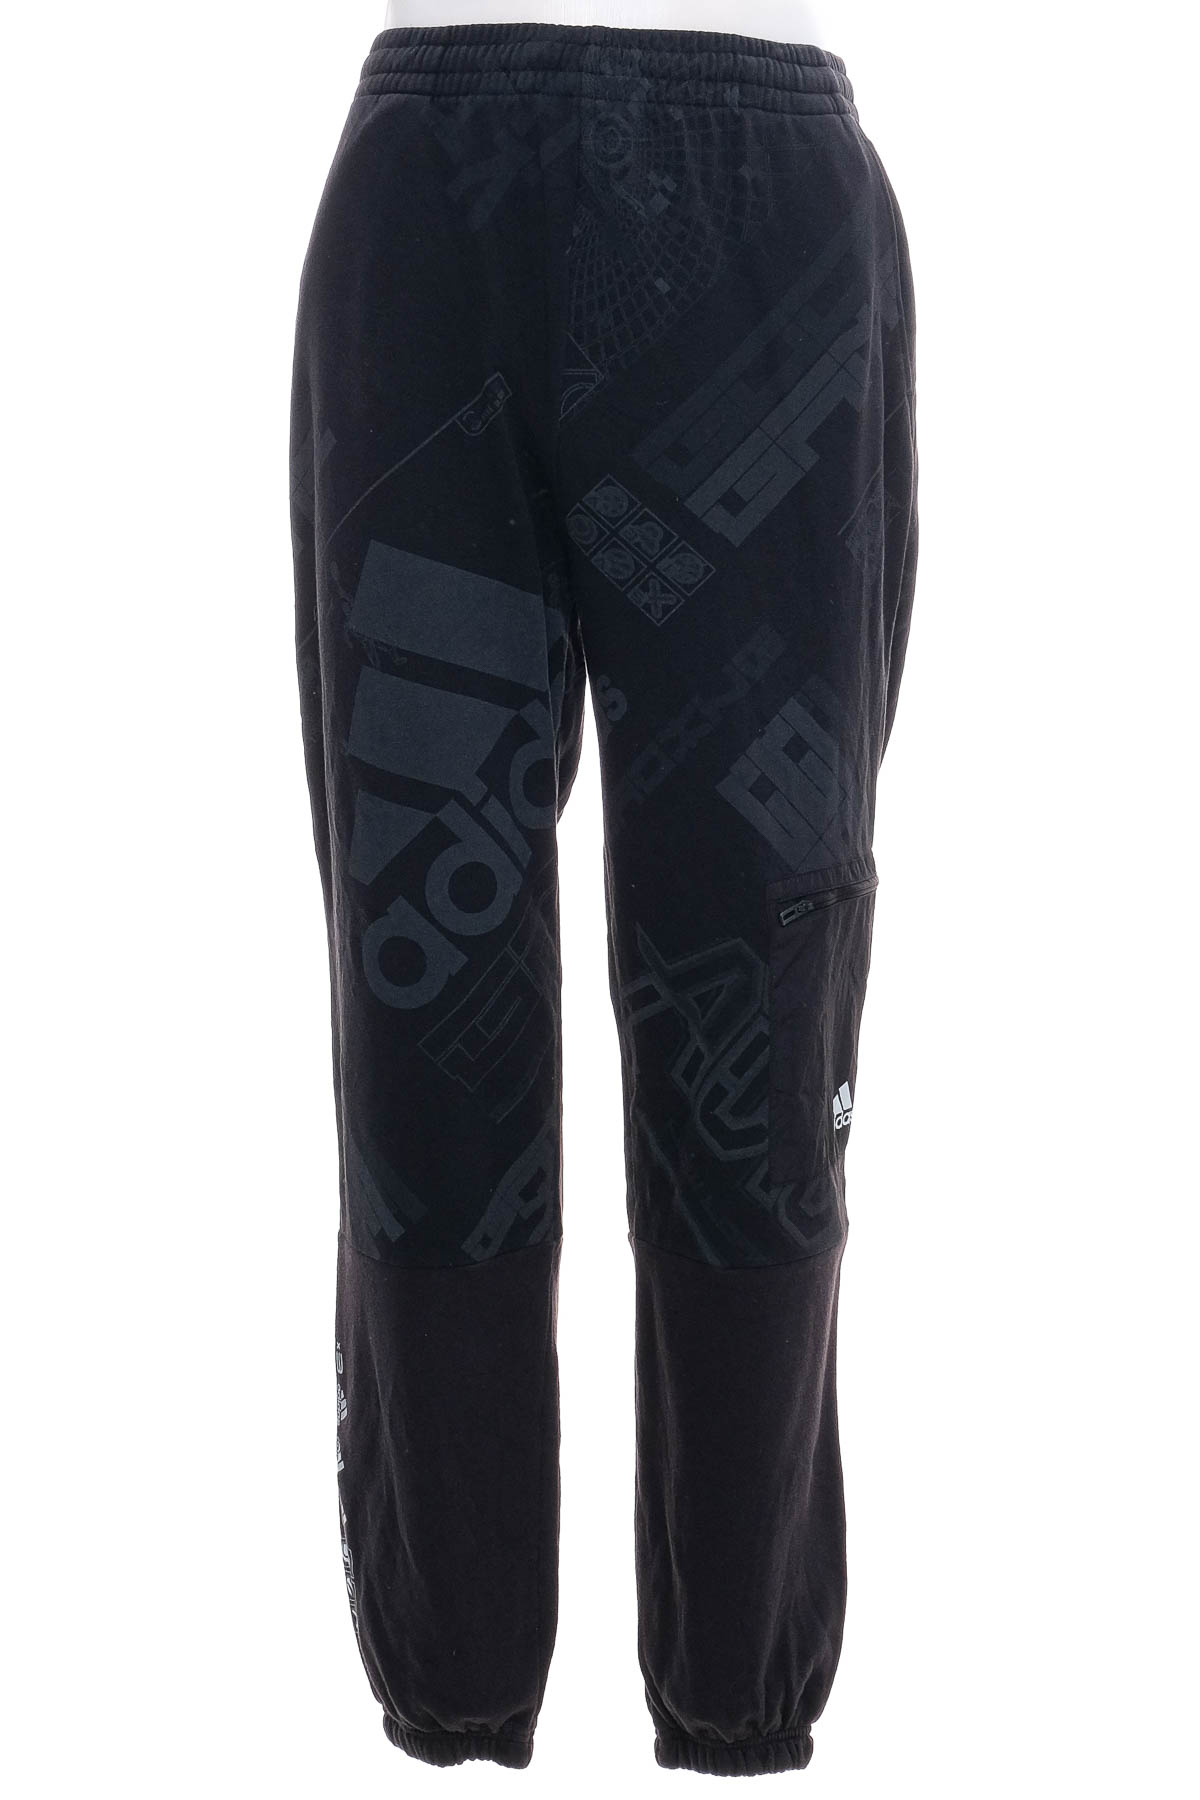 Track Bottoms for Boy - Adidas - 0